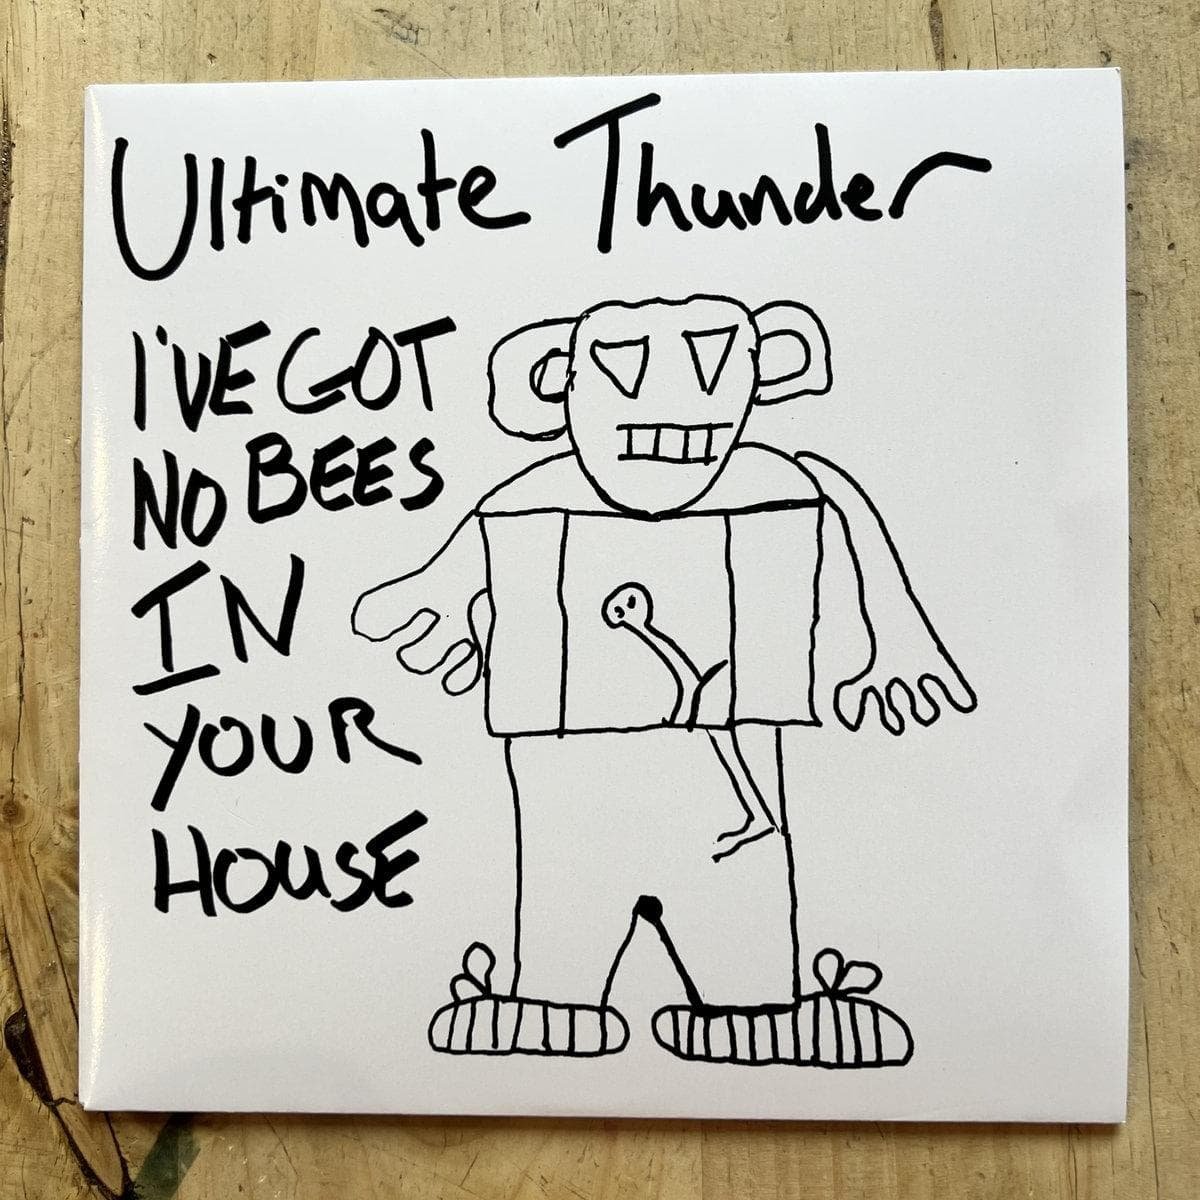 JUST IN: ‘I've Got No Bees In Your House’ & ‘A Spider Will Come To Eat Your Flesh’ by Ultimate Thunder Championed by the likes of Tim Burgess and Yard Act, Leeds group Ultimate Thunder have a full-length album and limited 7’’ out this week. normanrecords.com/artist/56380-u…